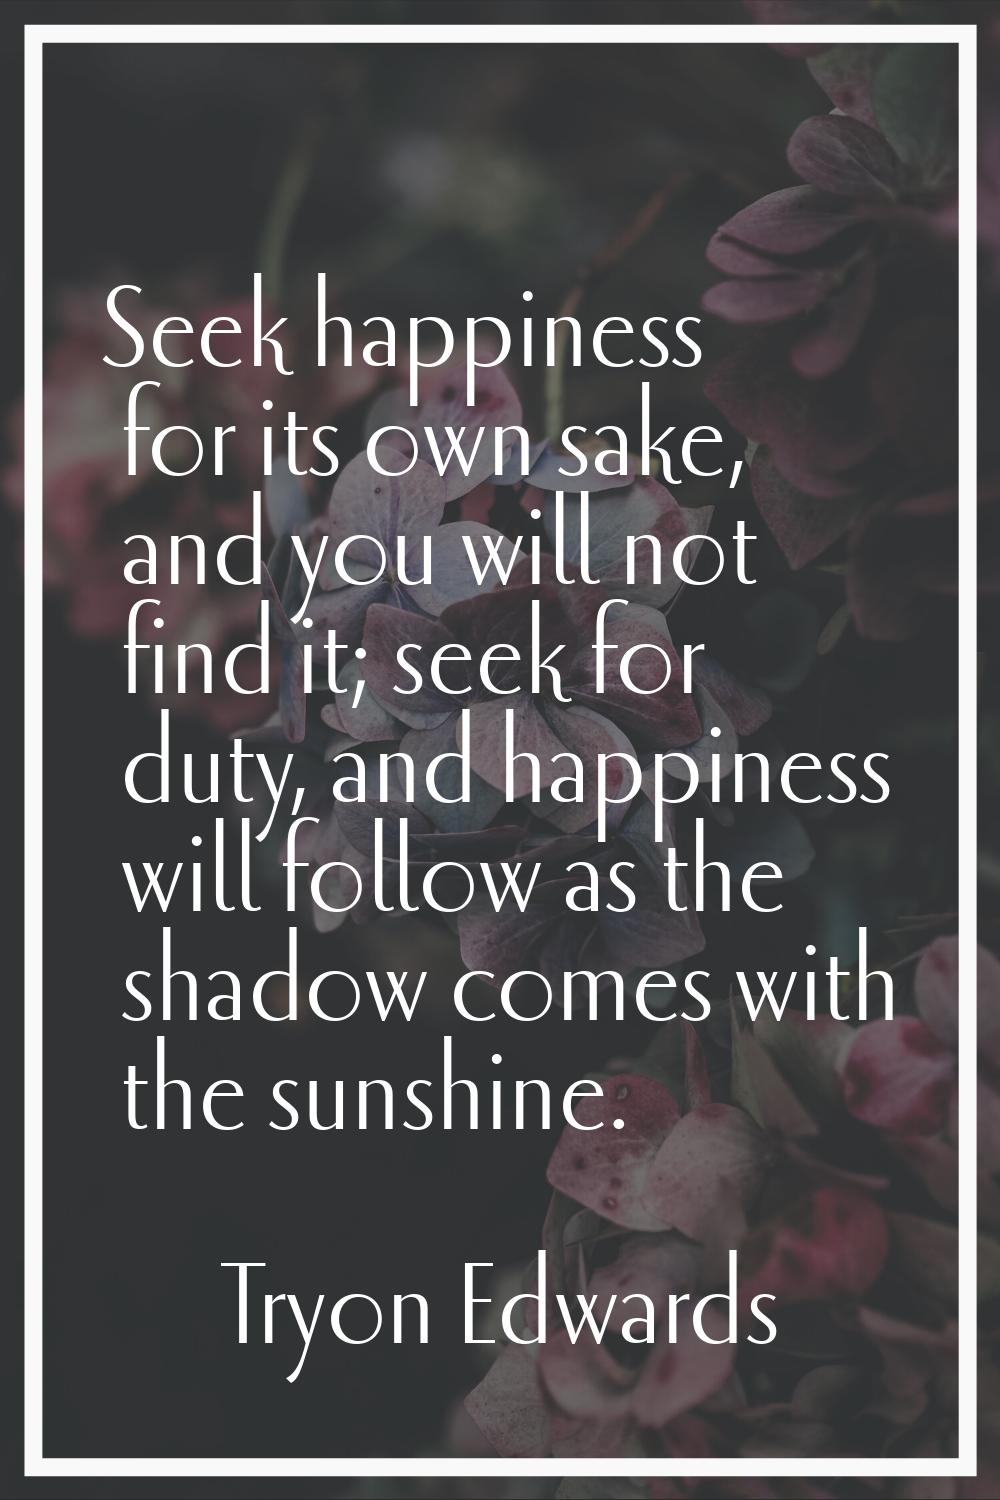 Seek happiness for its own sake, and you will not find it; seek for duty, and happiness will follow